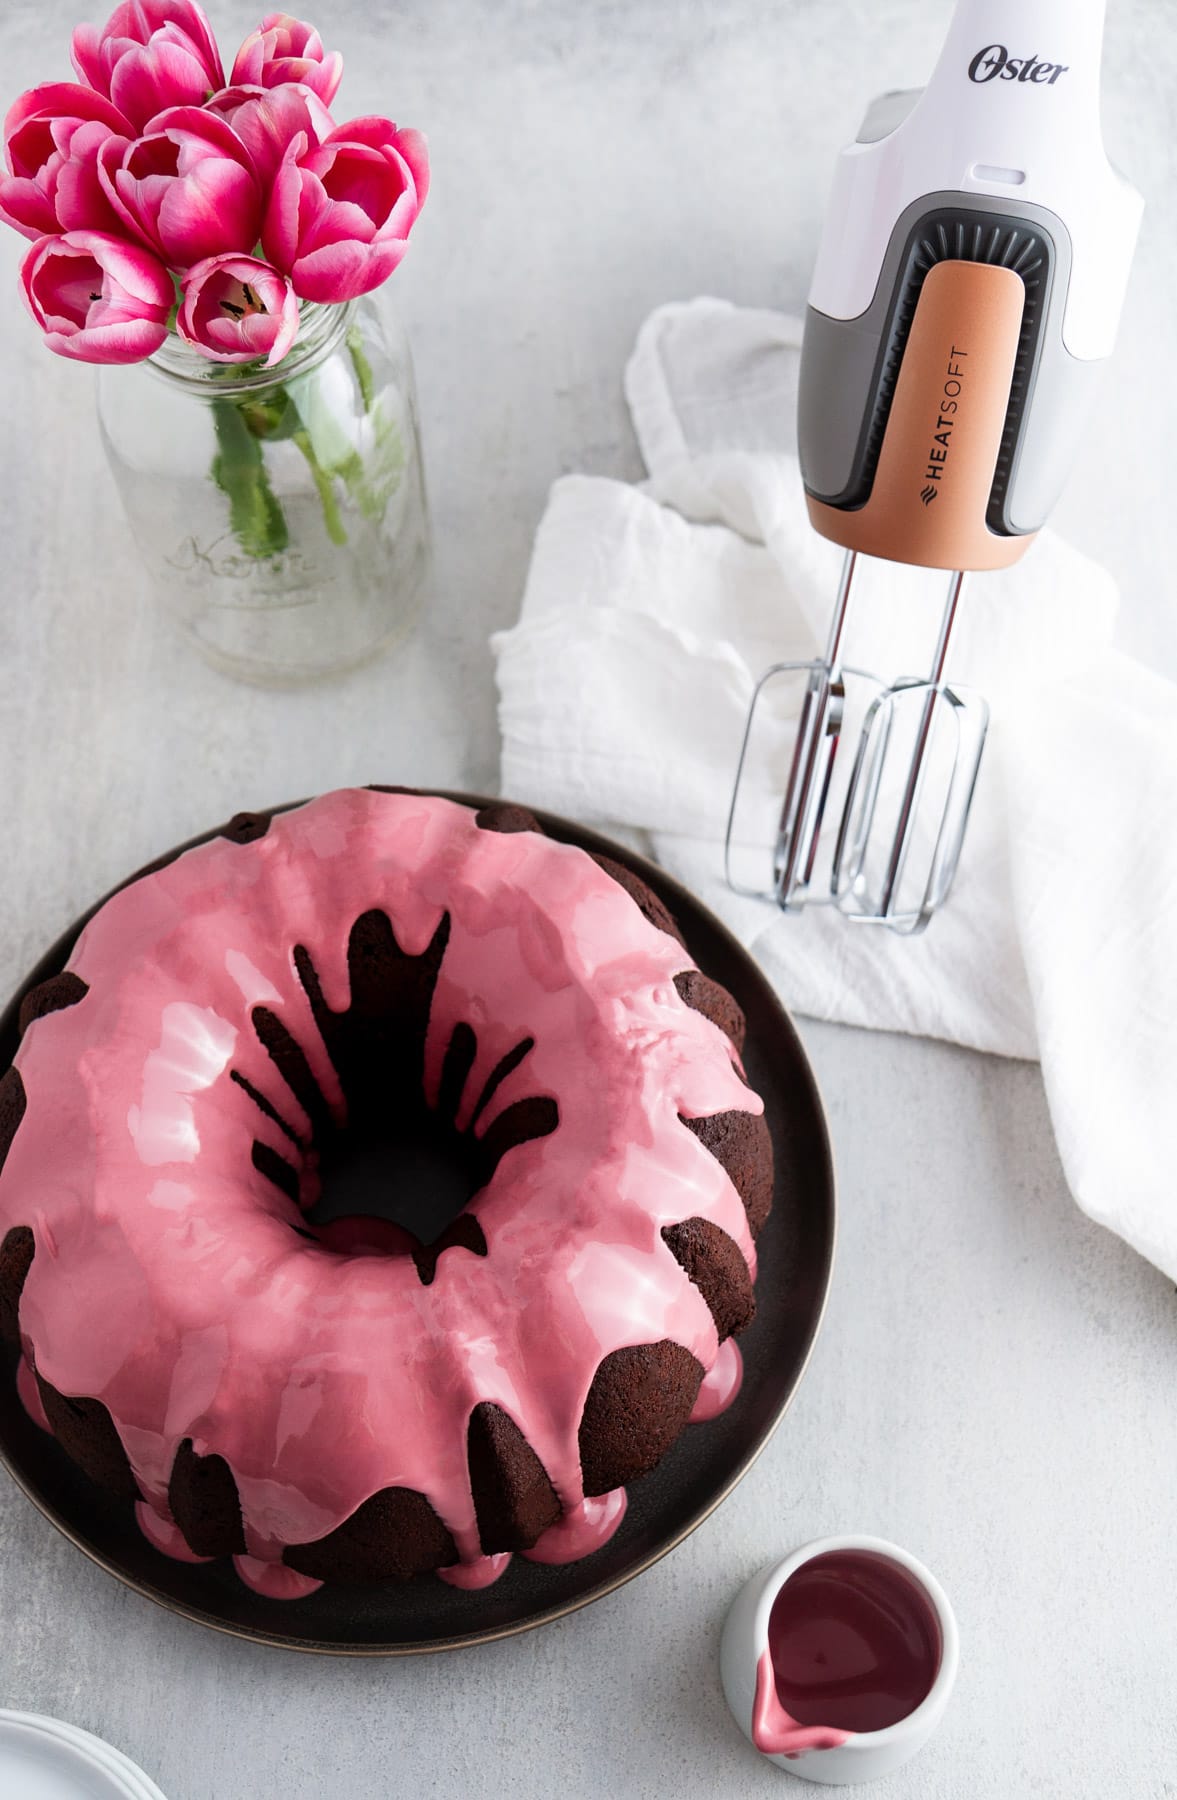 chocolate bundt cake with ruby chocolate glaze on a plate next to a vase of flowers and a hand mixer